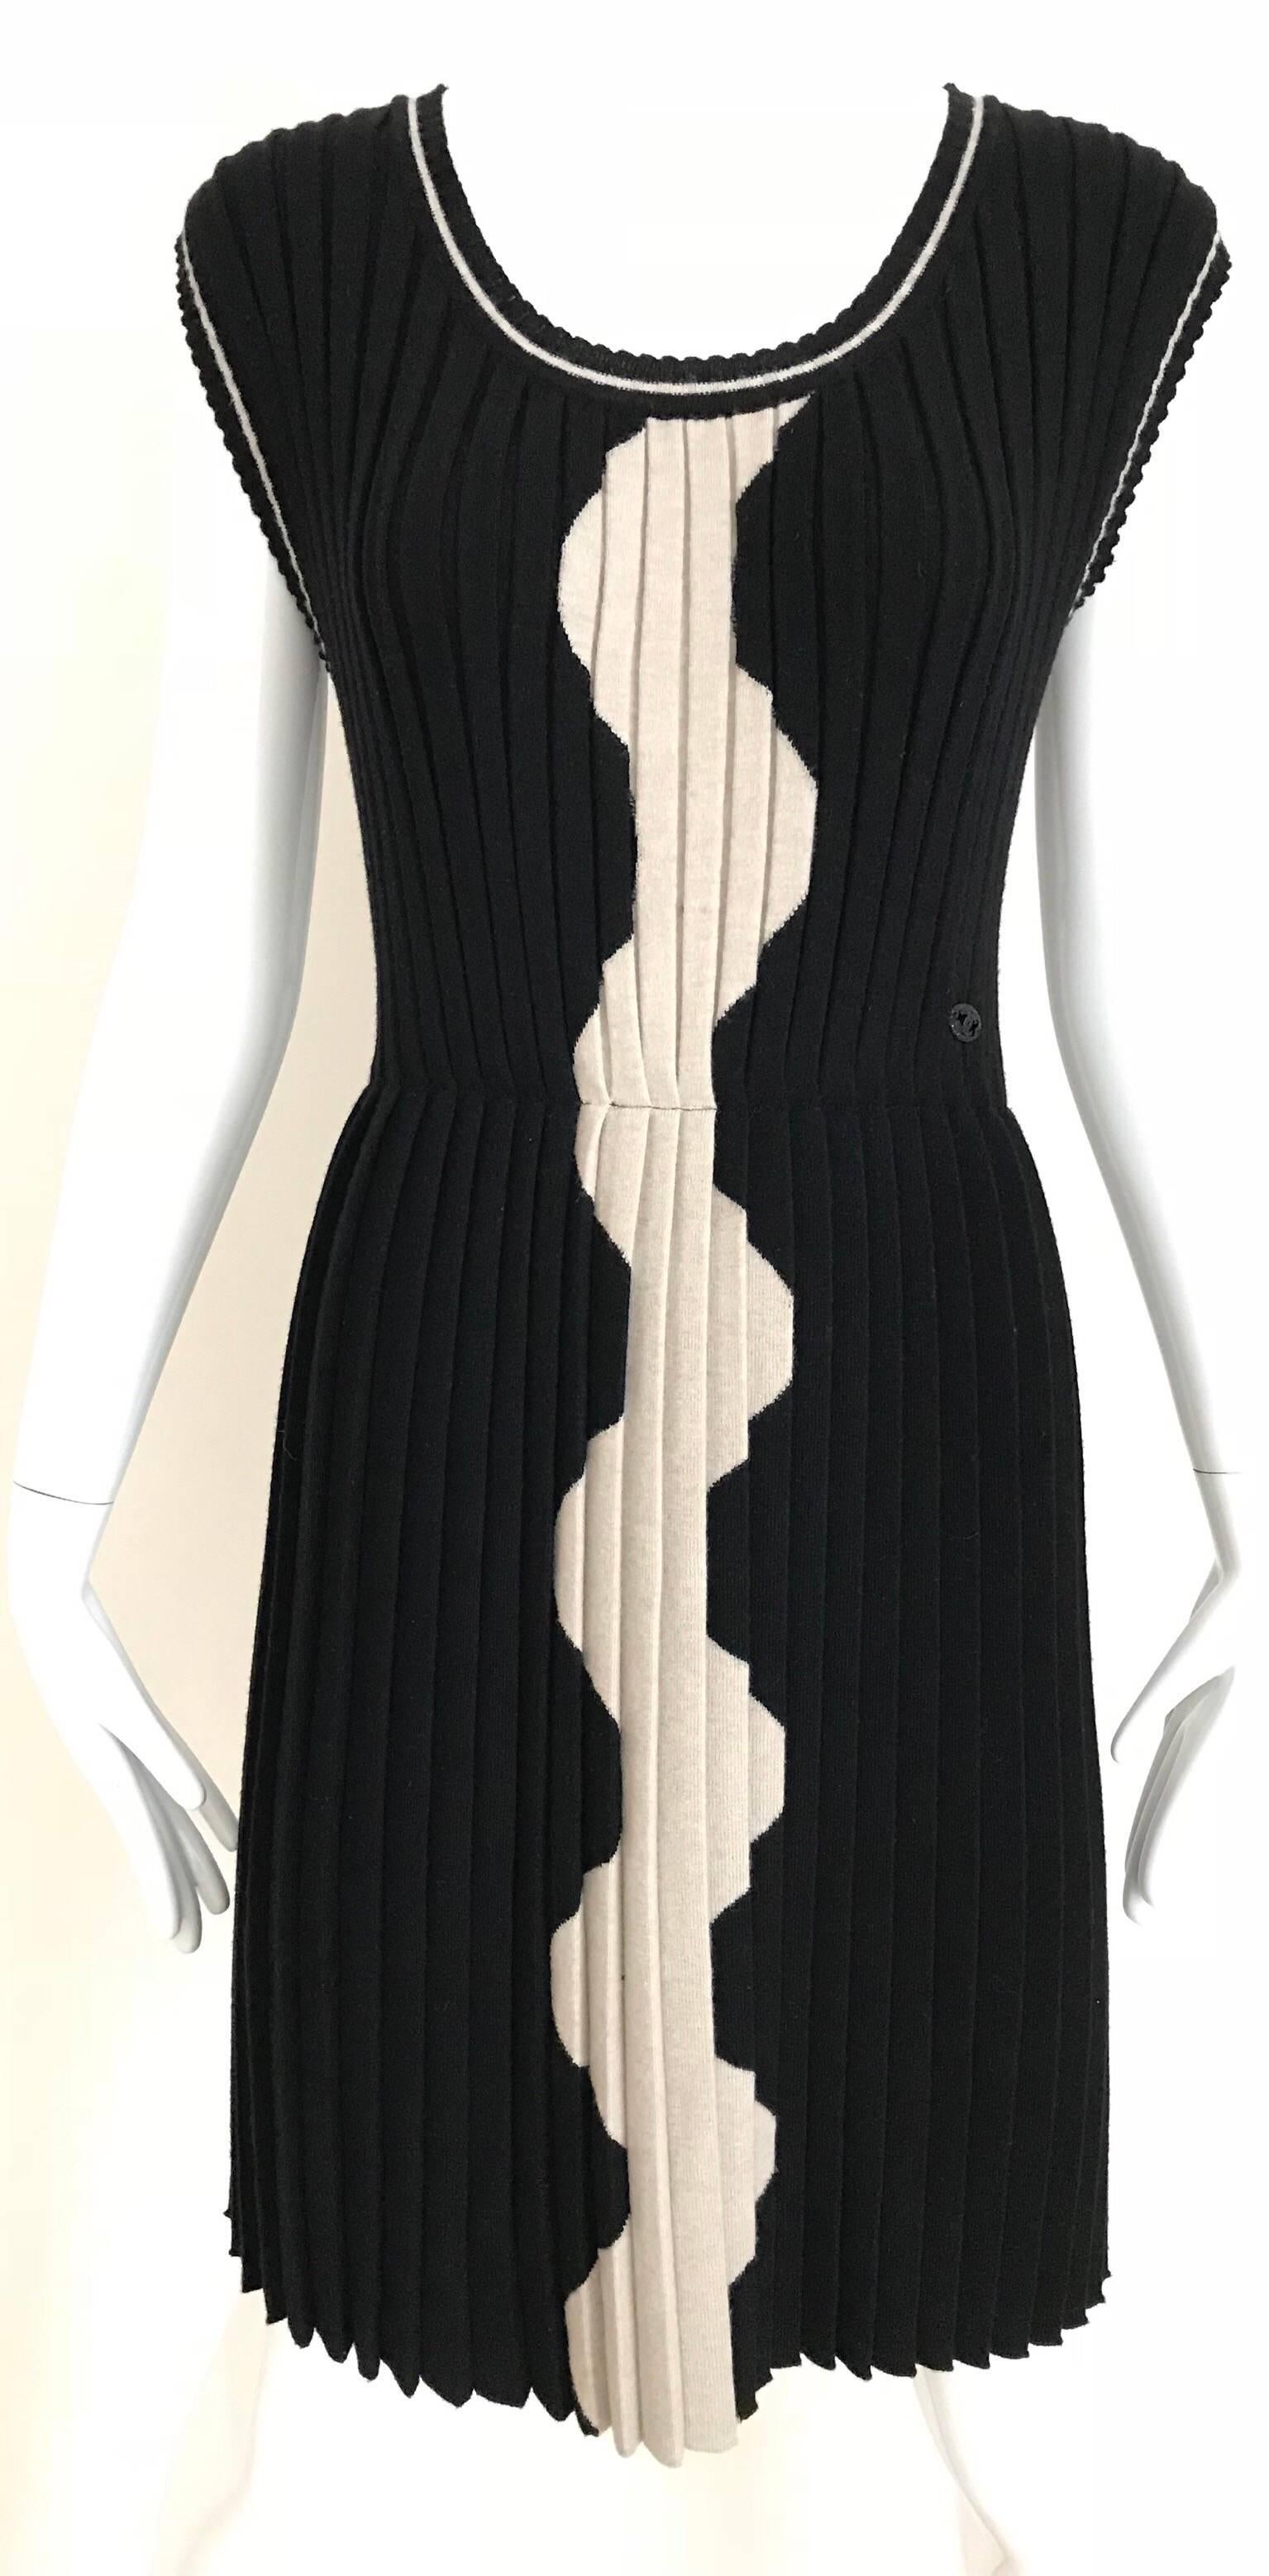 Chanel Black and Creme Knit Dress In Excellent Condition For Sale In Beverly Hills, CA